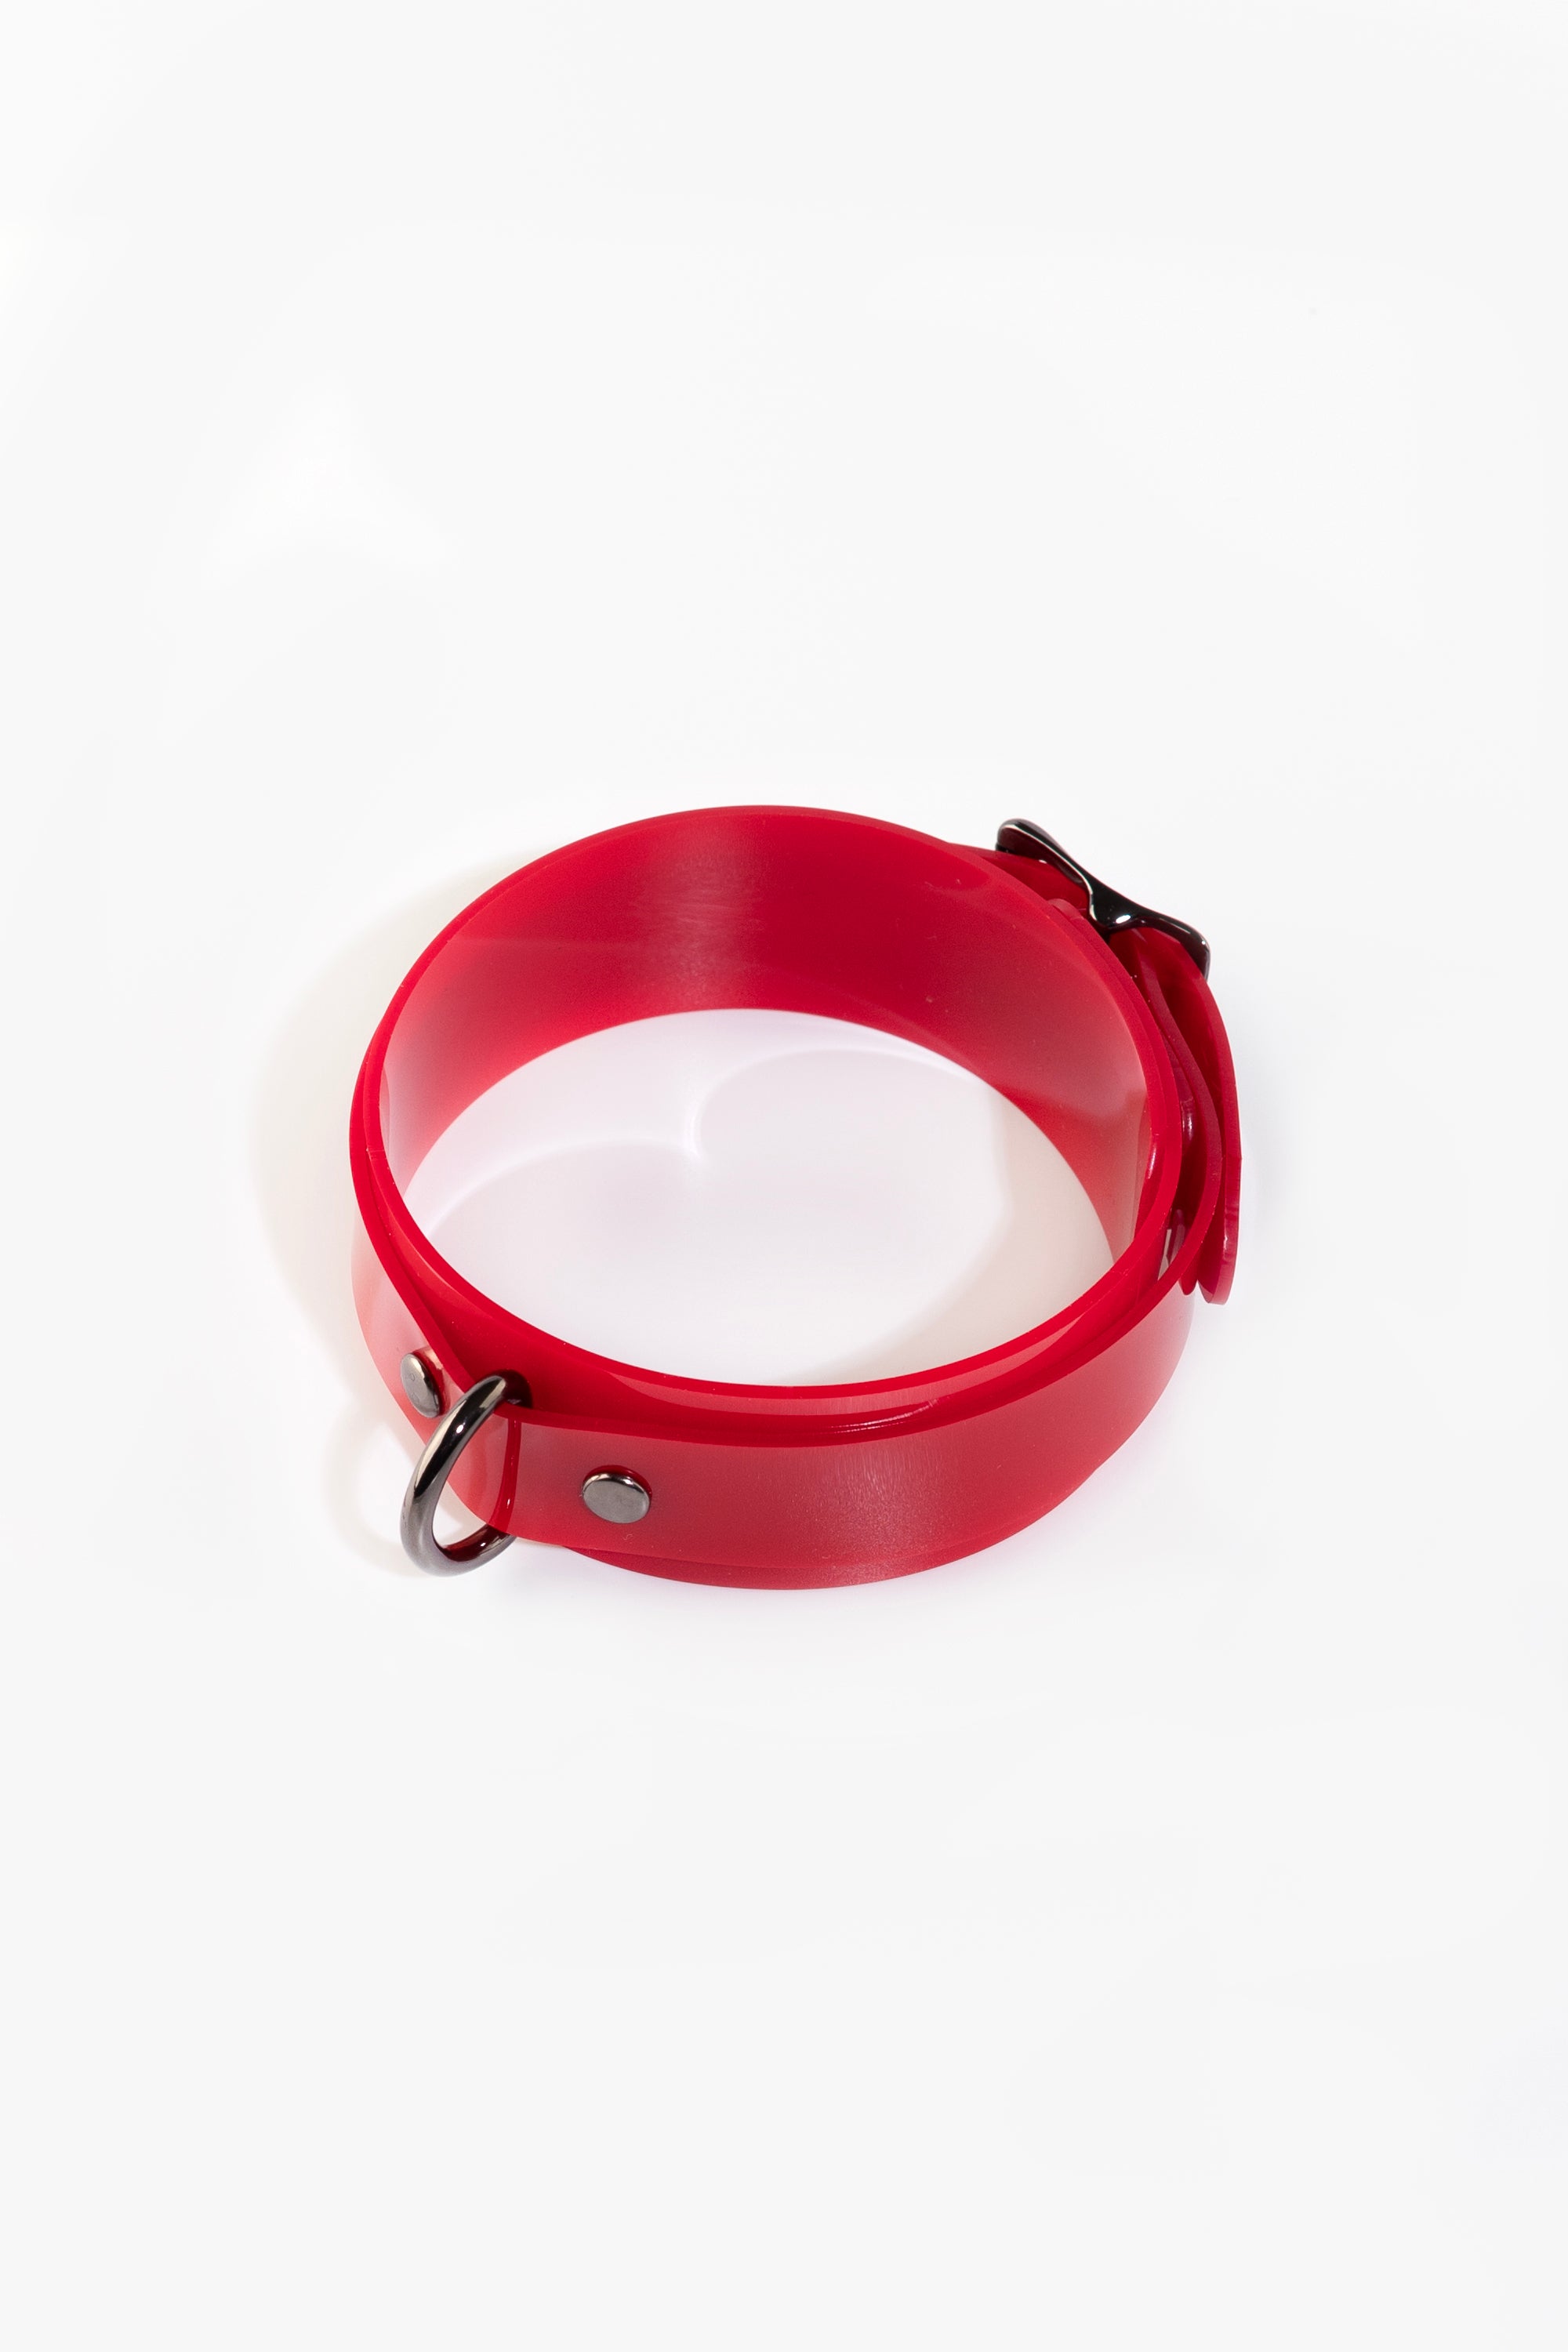 Lockable choker with D-ring, red/black